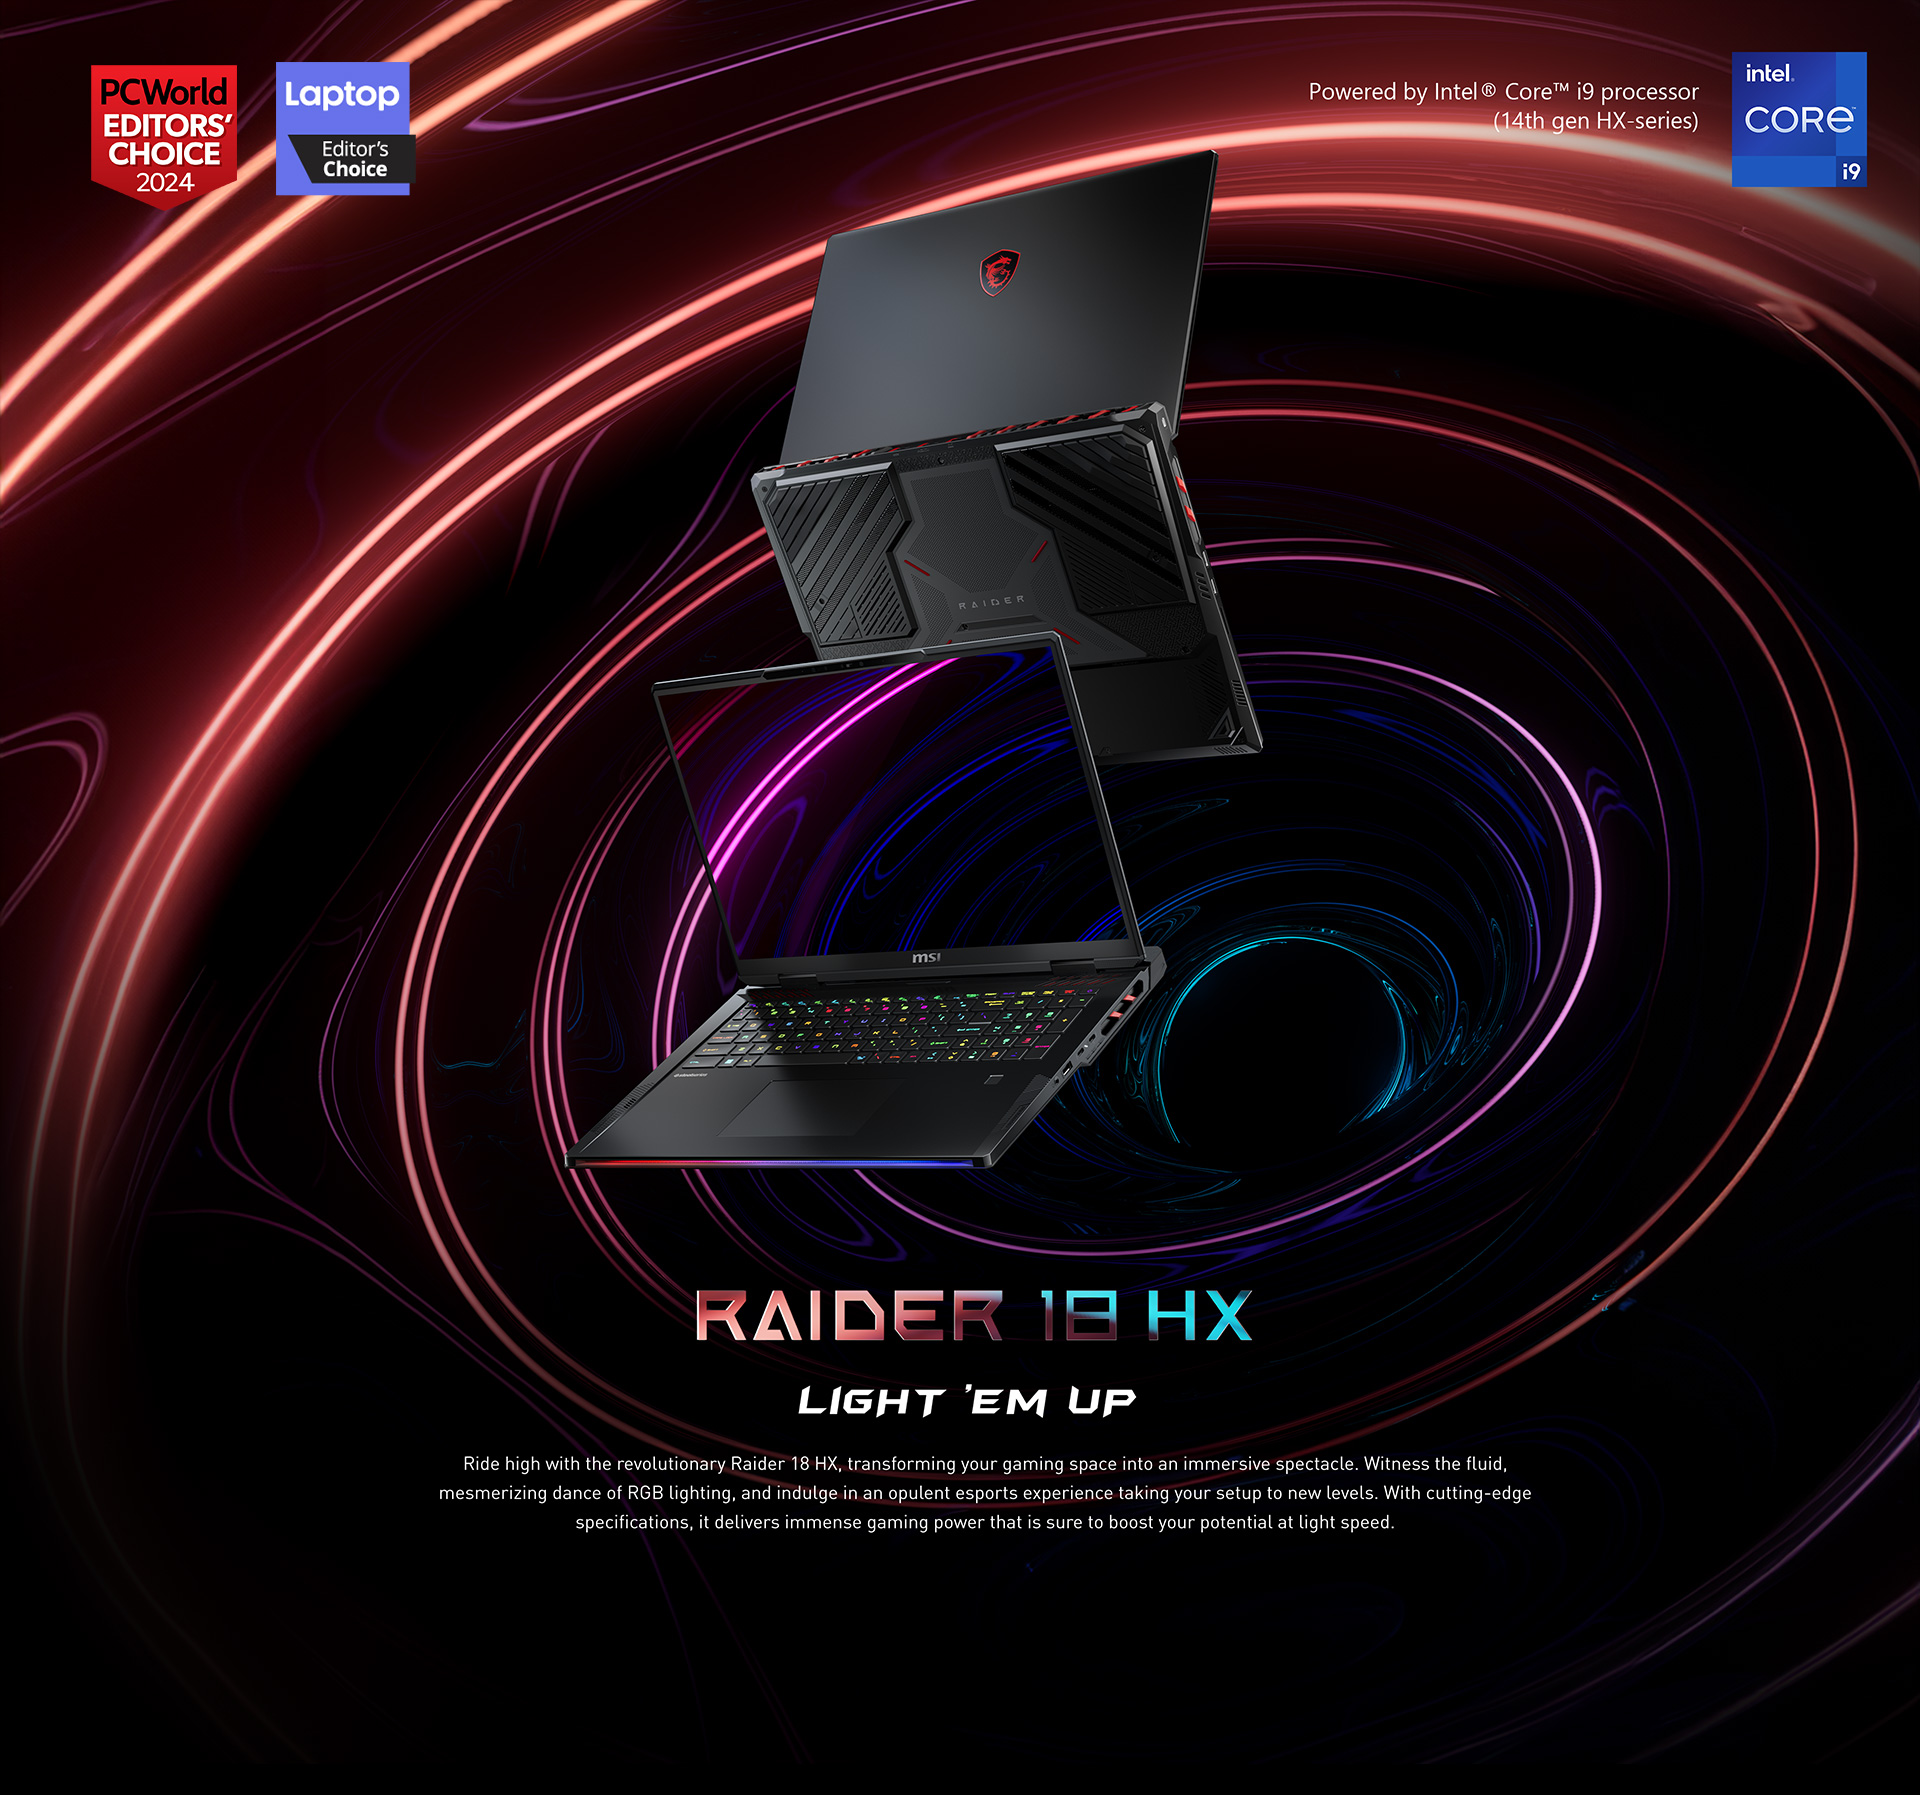 Ride high with the revolutionary Raider 18 HX, transforming your gaming space into an immersive spectacle. Witness the fluid, mesmerizing dance of RGB lighting, and indulge in an opulent esports experience taking your setup to new levels. With cutting-edge specifications, it delivers immense gaming power that is sure to boost your potential at light speed.